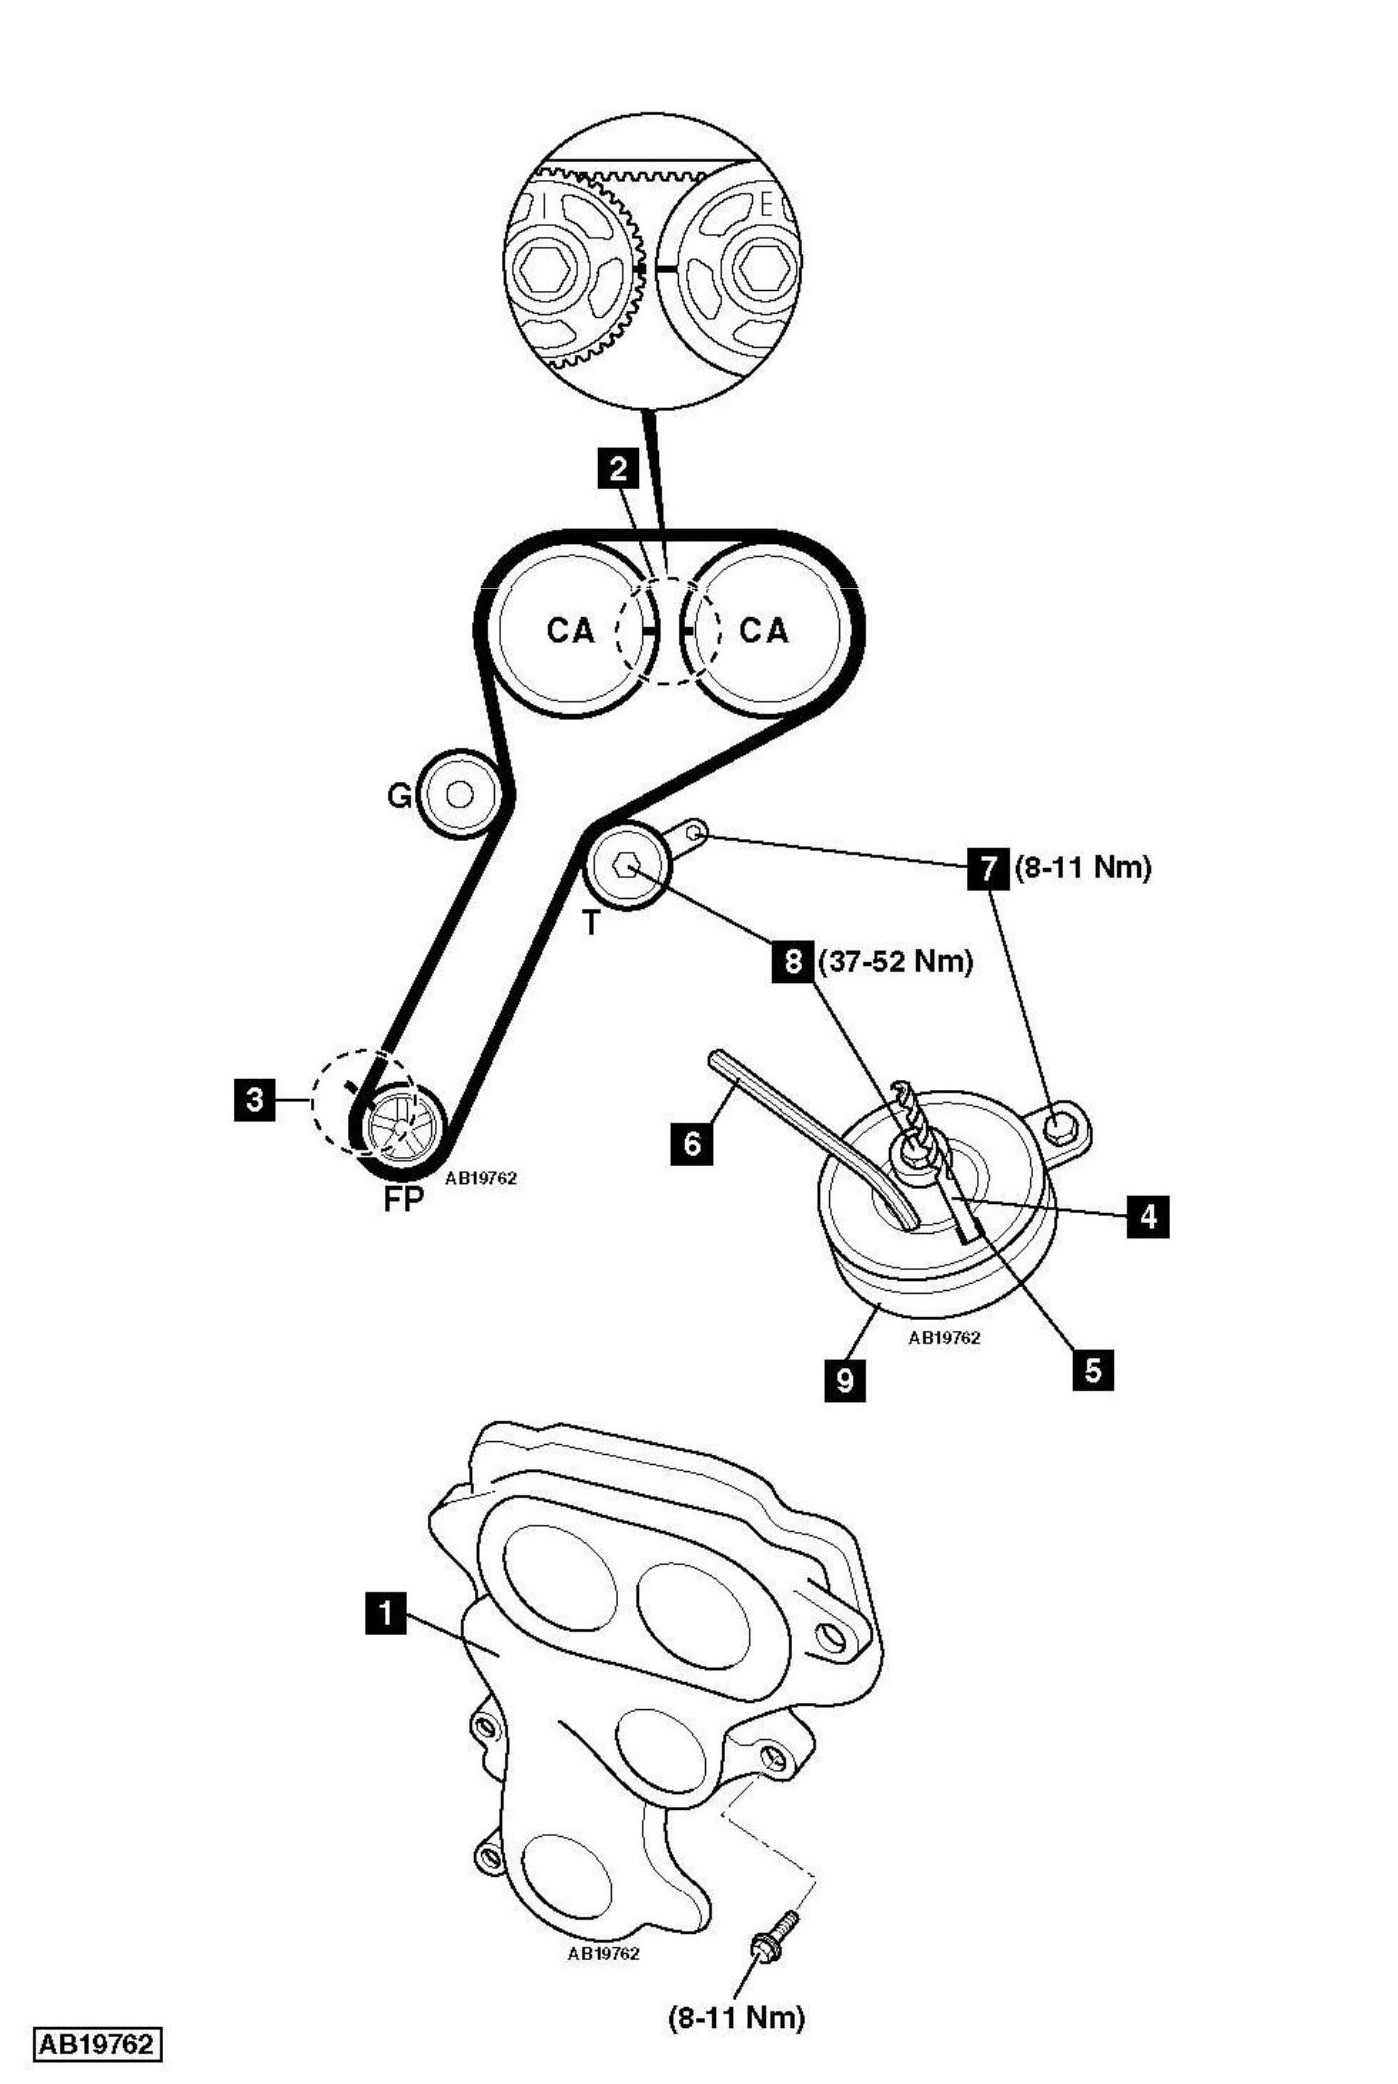 2003 ford Ranger 2 3 Engine Diagram How to Replace Timing Belt On ford Ranger 3 0d Tdi 2008 Of 2003 ford Ranger 2 3 Engine Diagram